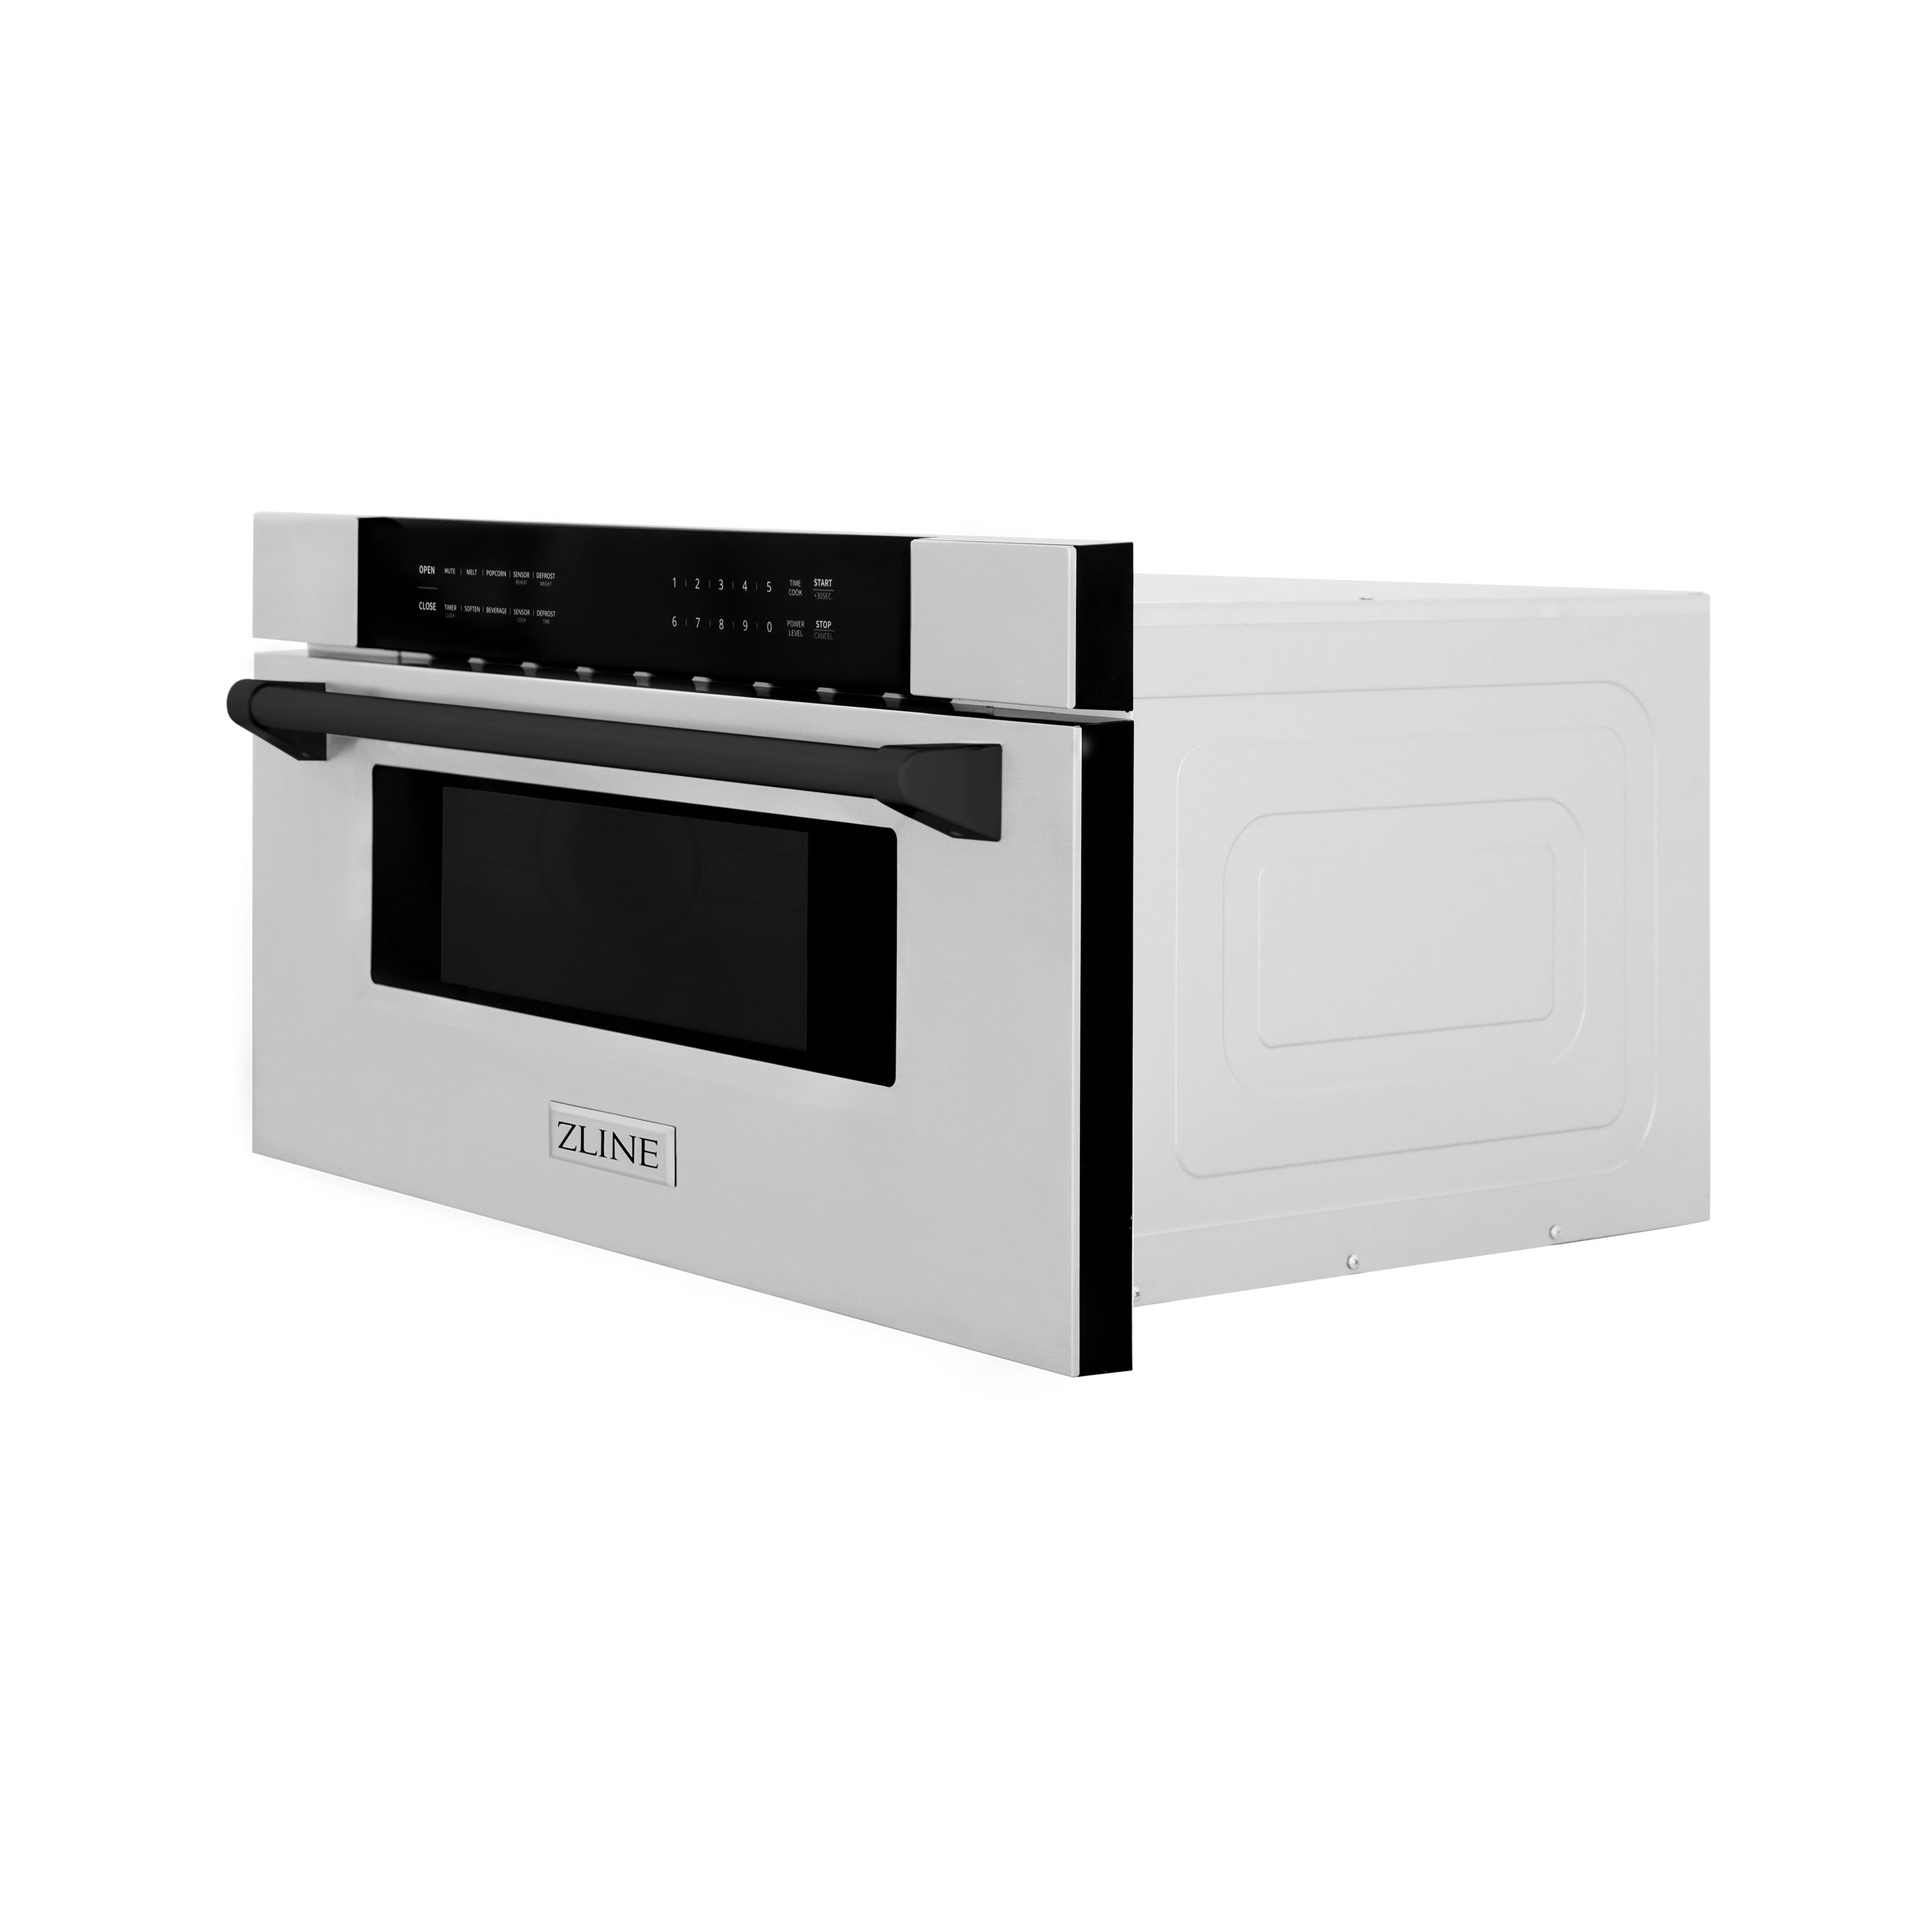 ZLINE Autograph Edition 30" 1.2 cu. ft. Built-In Microwave Drawer in Stainless Steel with Matte Black Accents